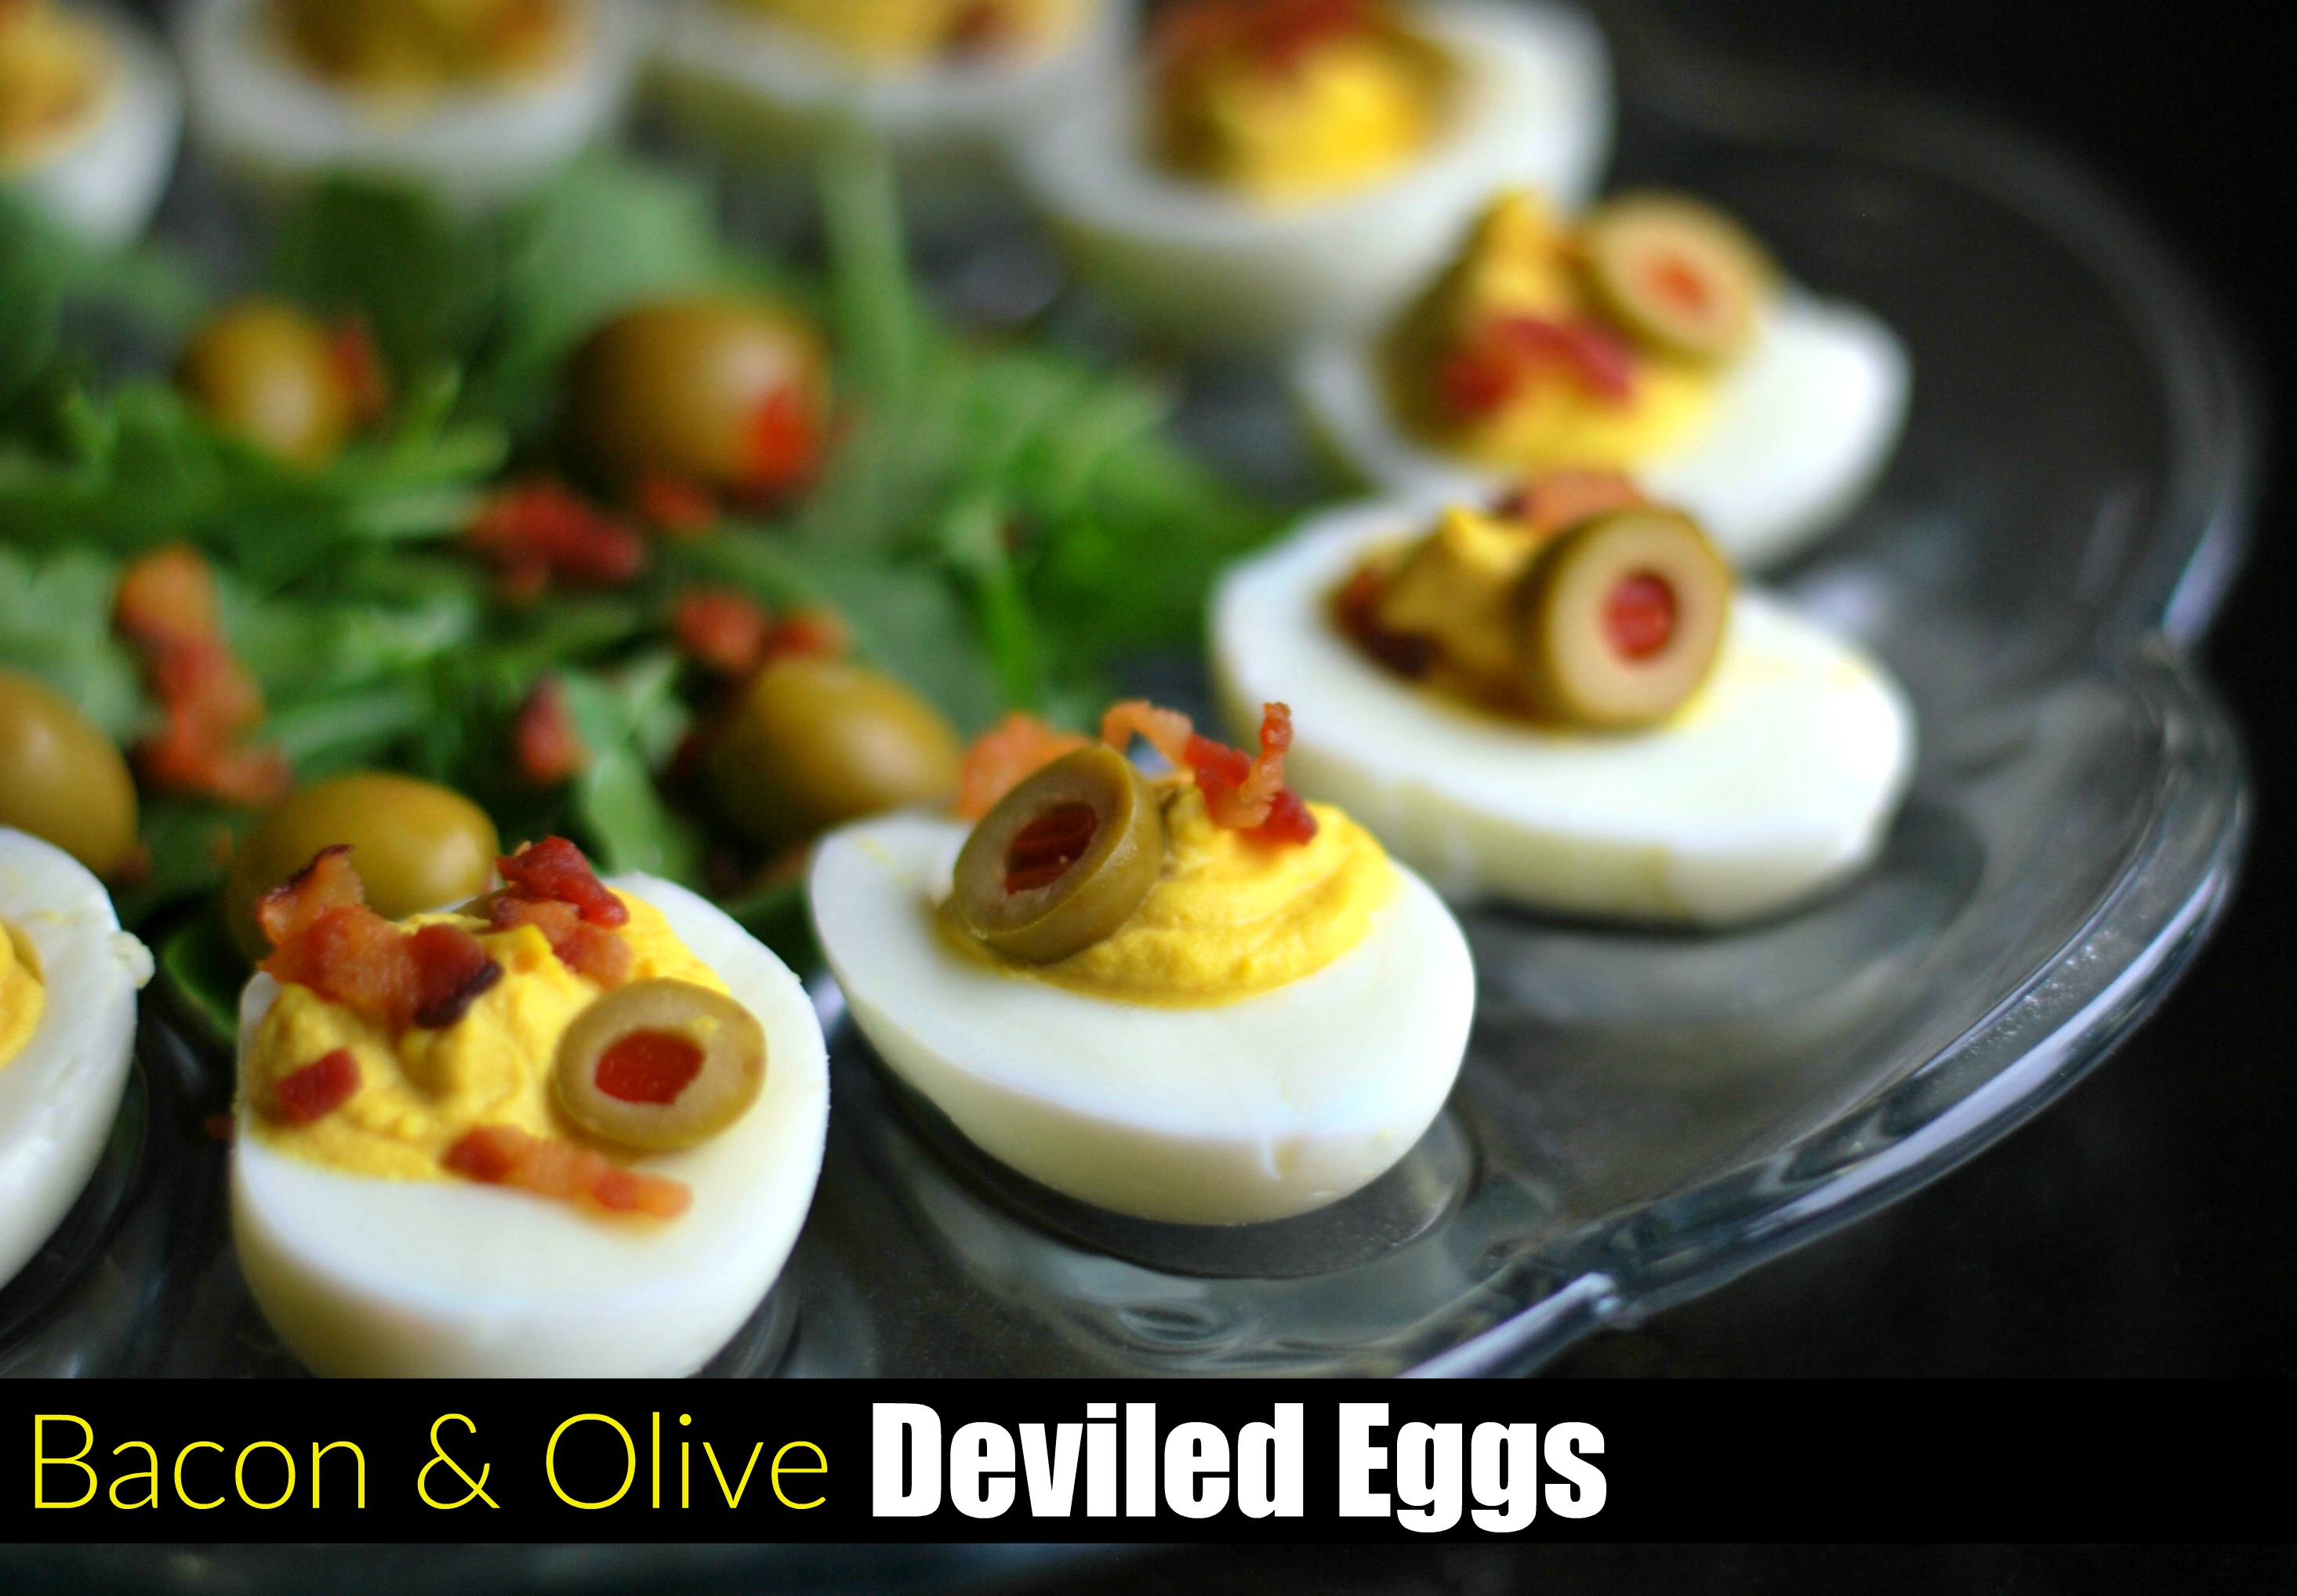 Bacon & Olive Deviled Eggs